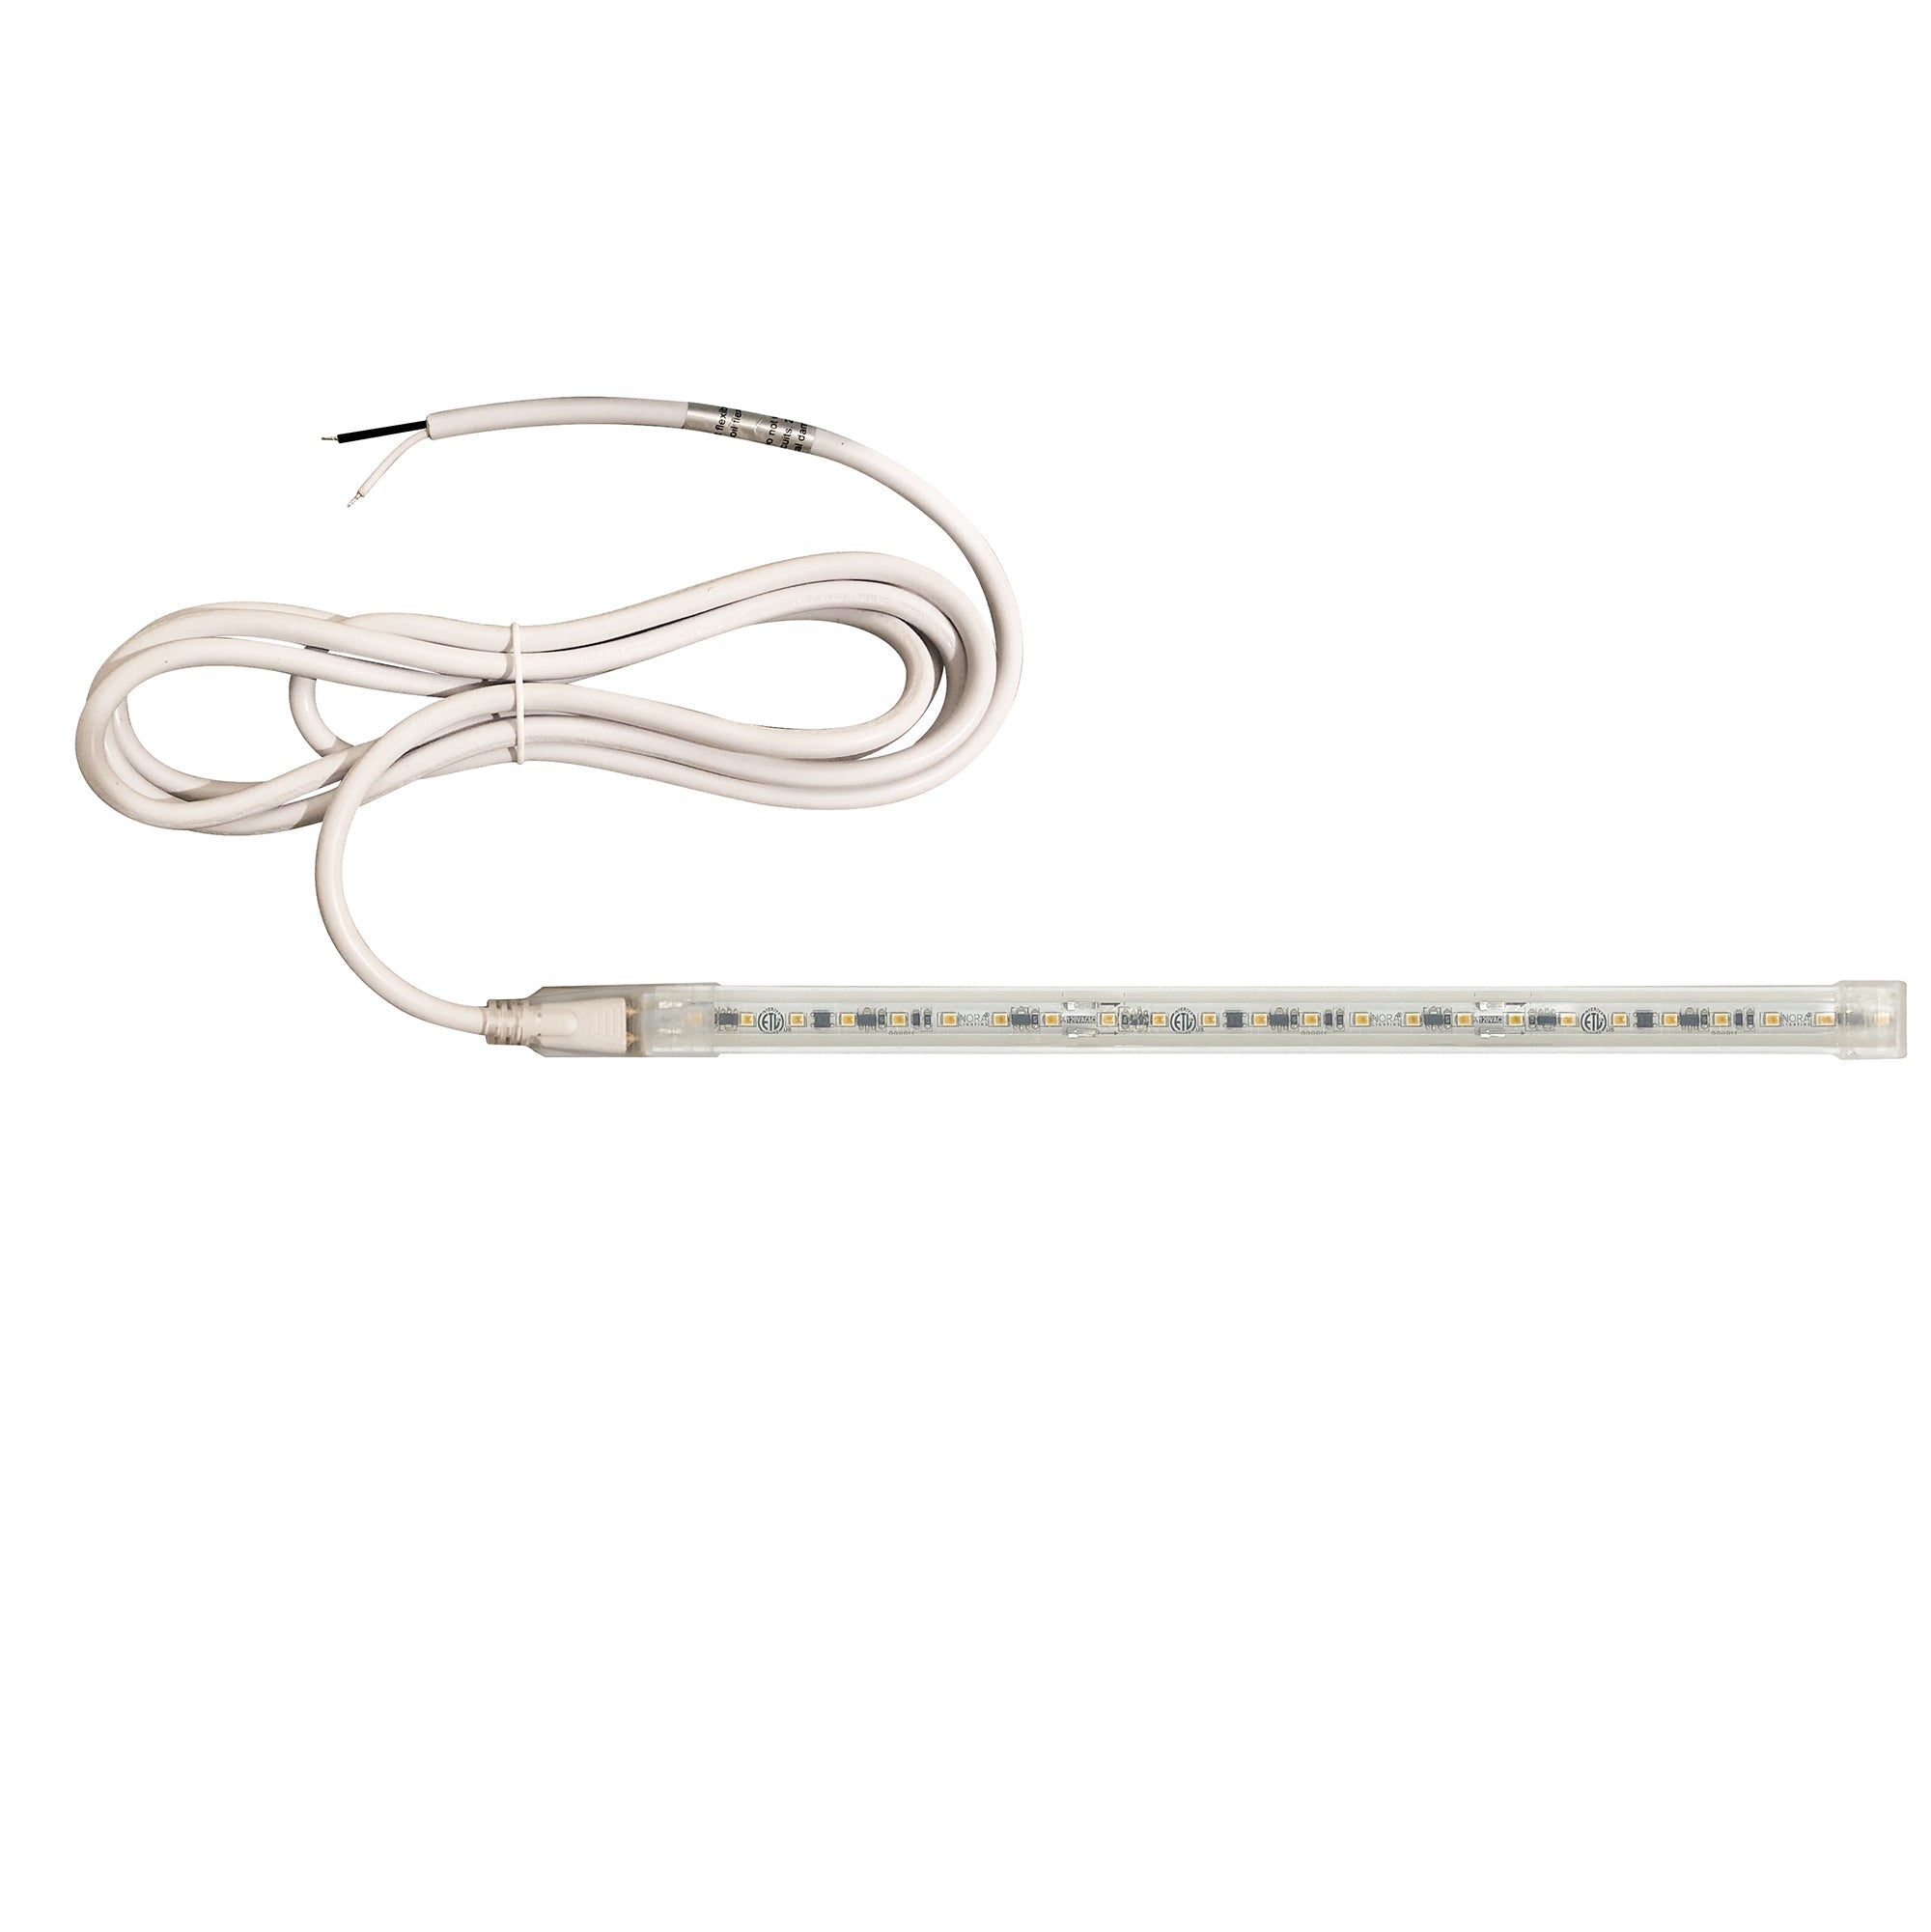 Nora Lighting NUTP13-W5-4-12-930/HW - Accent / Undercabinet - Custom Cut 5-ft, 4-in 120V Continuous LED Tape Light, 330lm / 3.6W per foot, 3000K, w/ Mounting Clips and 8' Hardwired Power Cord